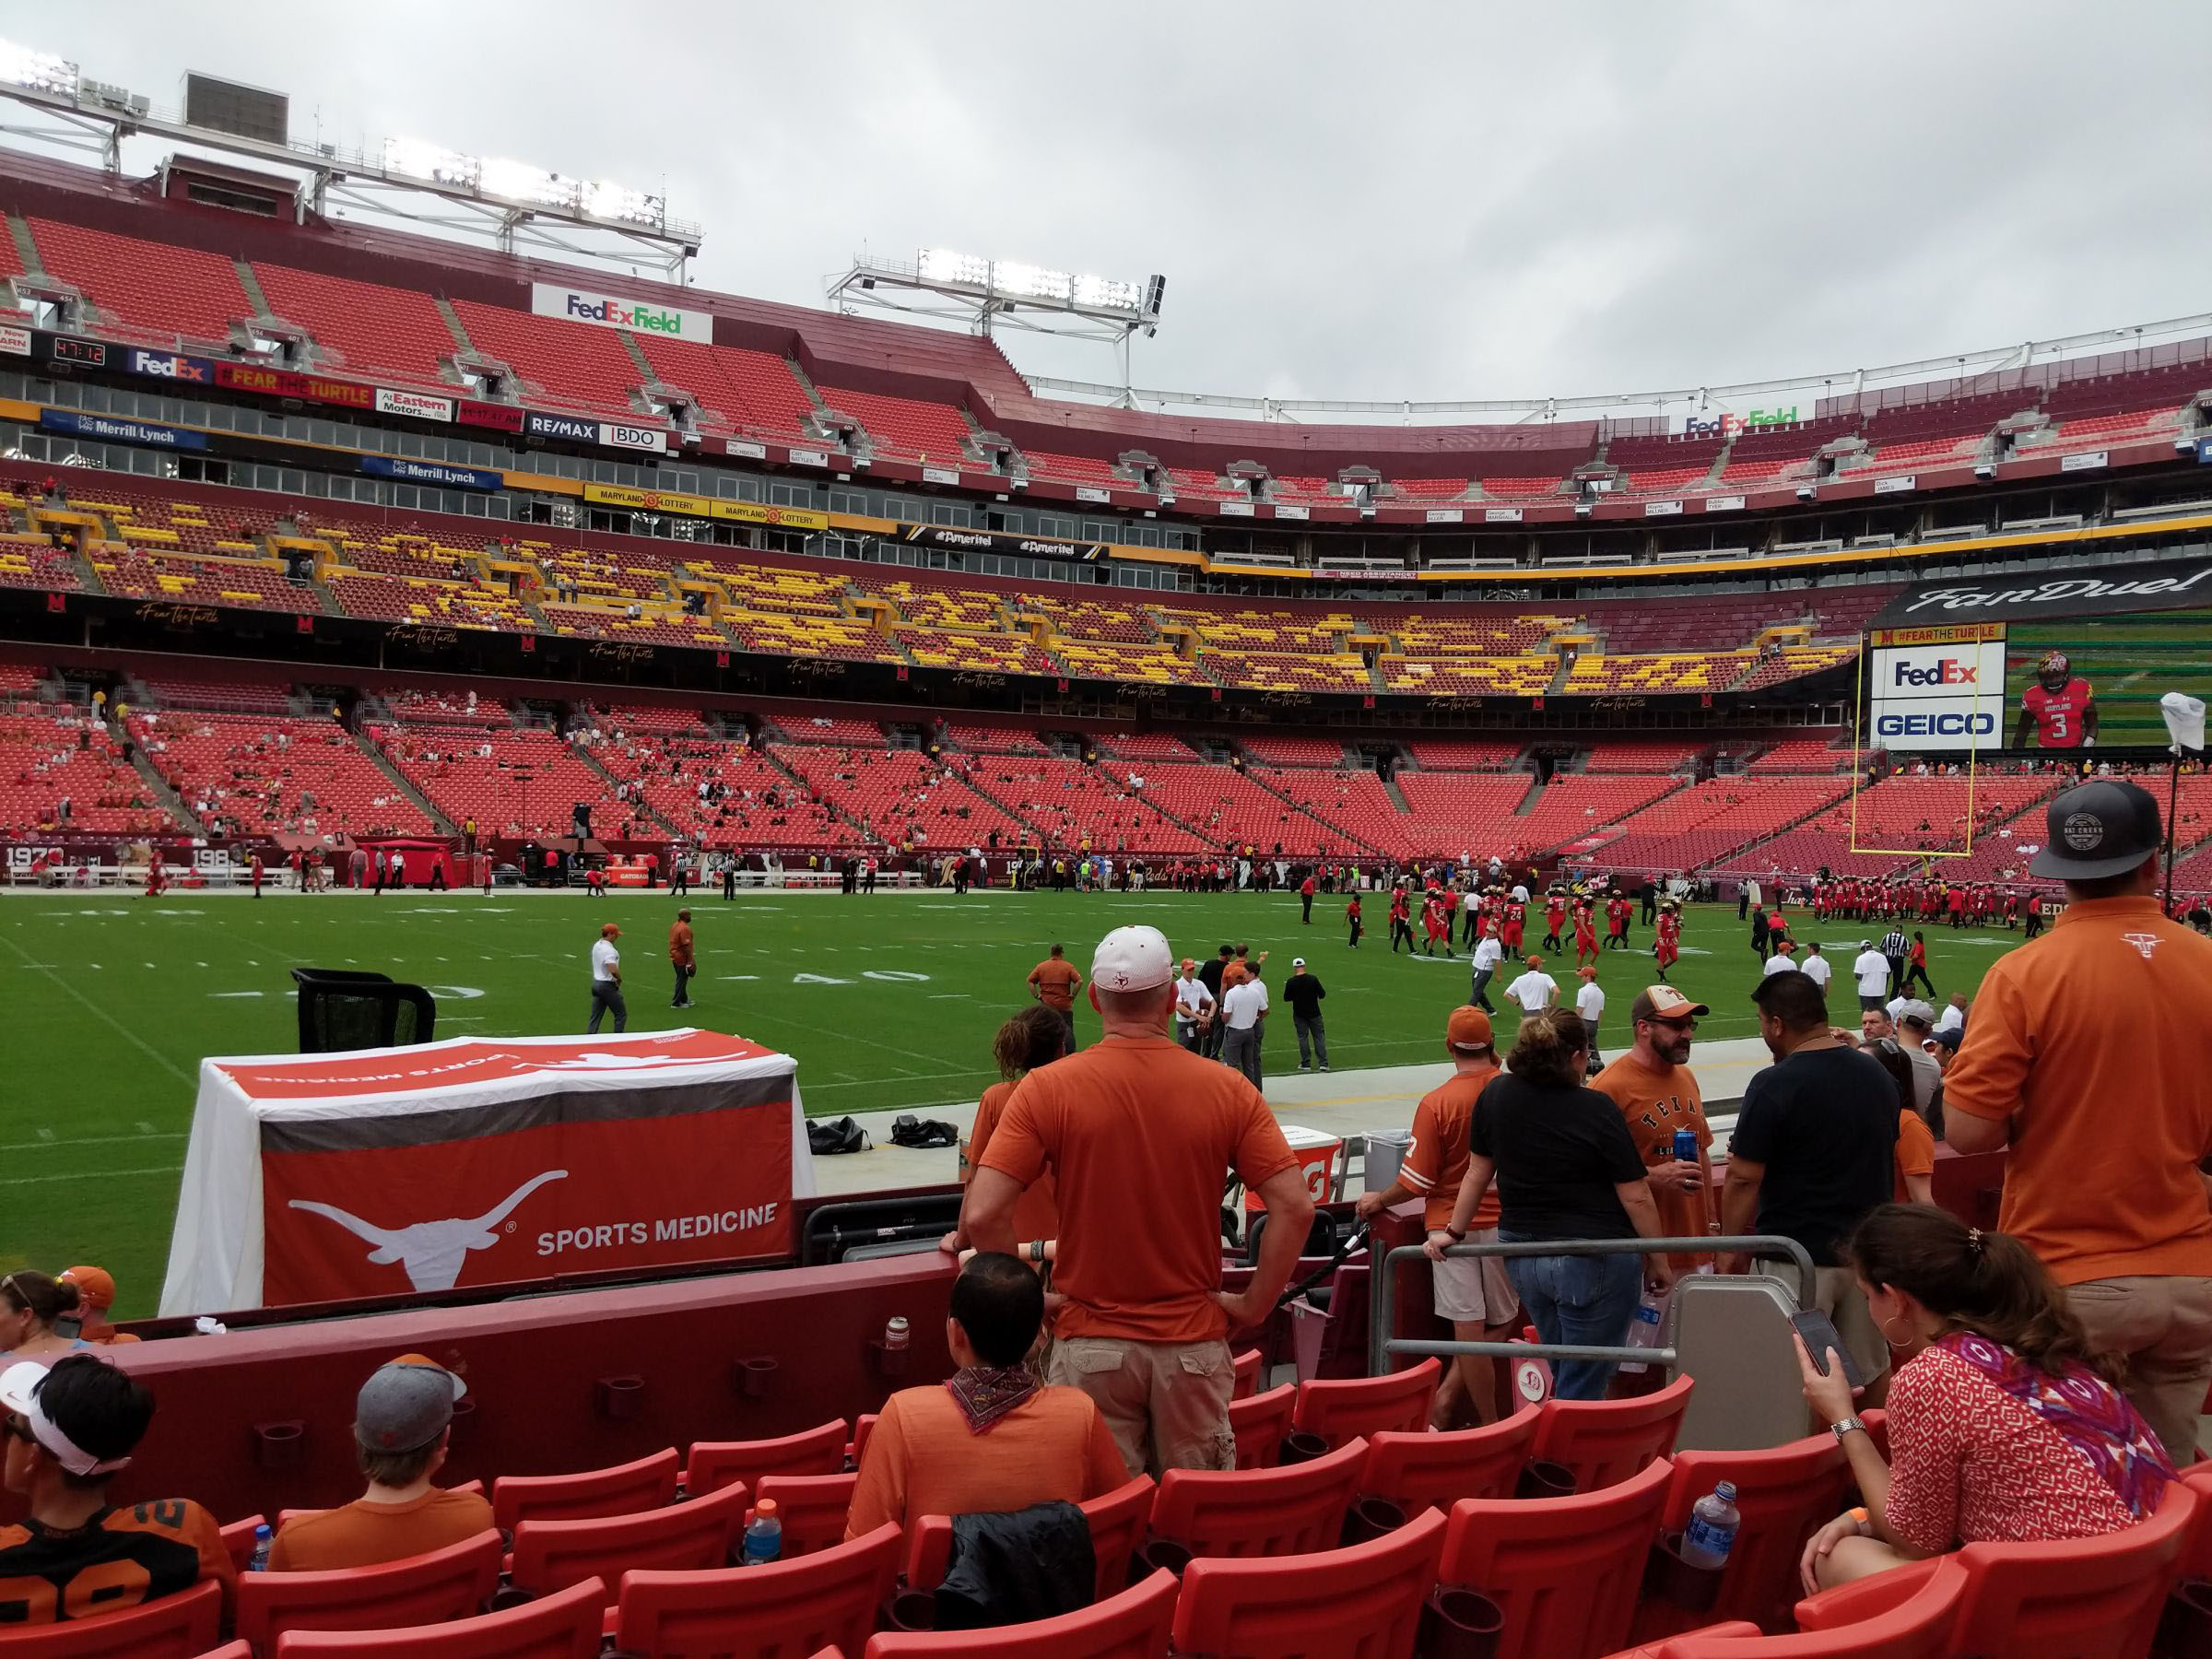 section 124, row 7 seat view  - fedexfield